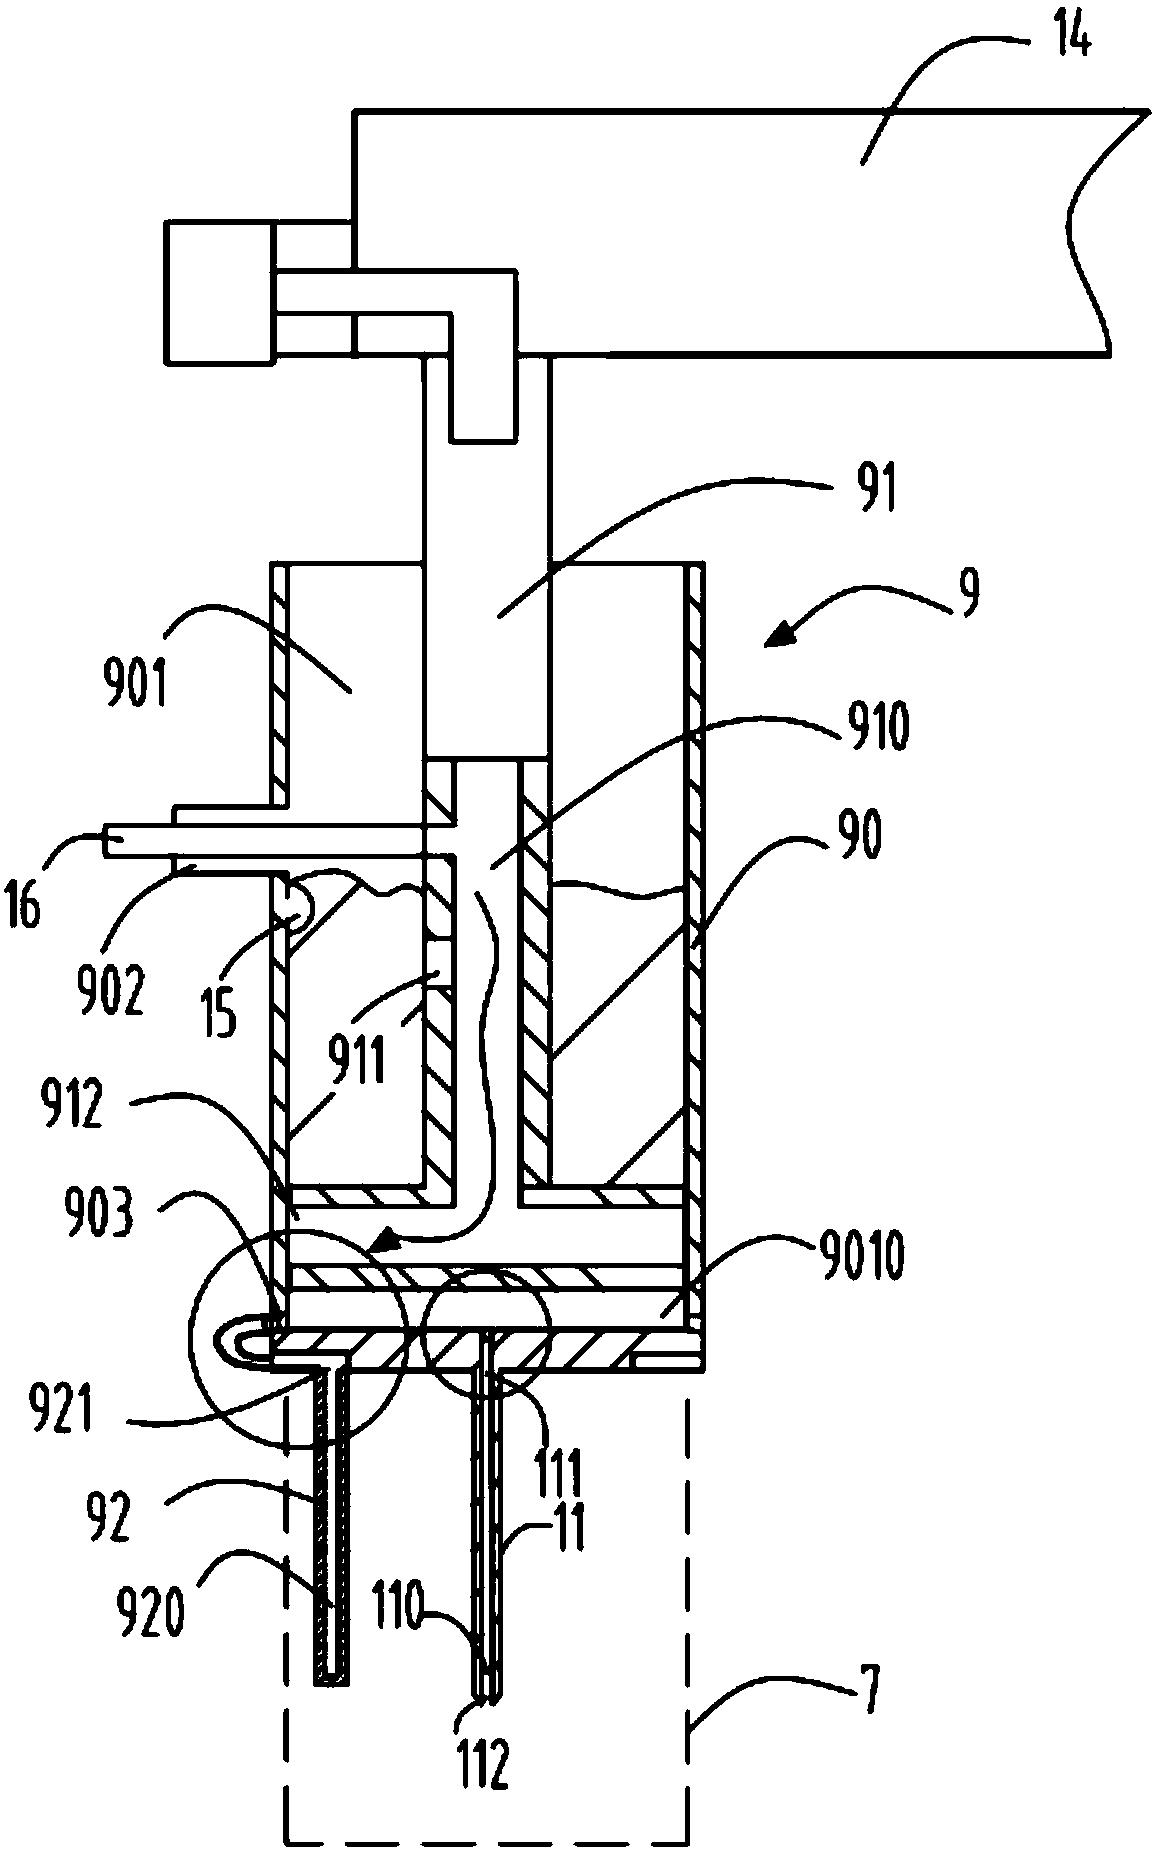 An alkaline dry battery electrolyte centrifugal absorption device